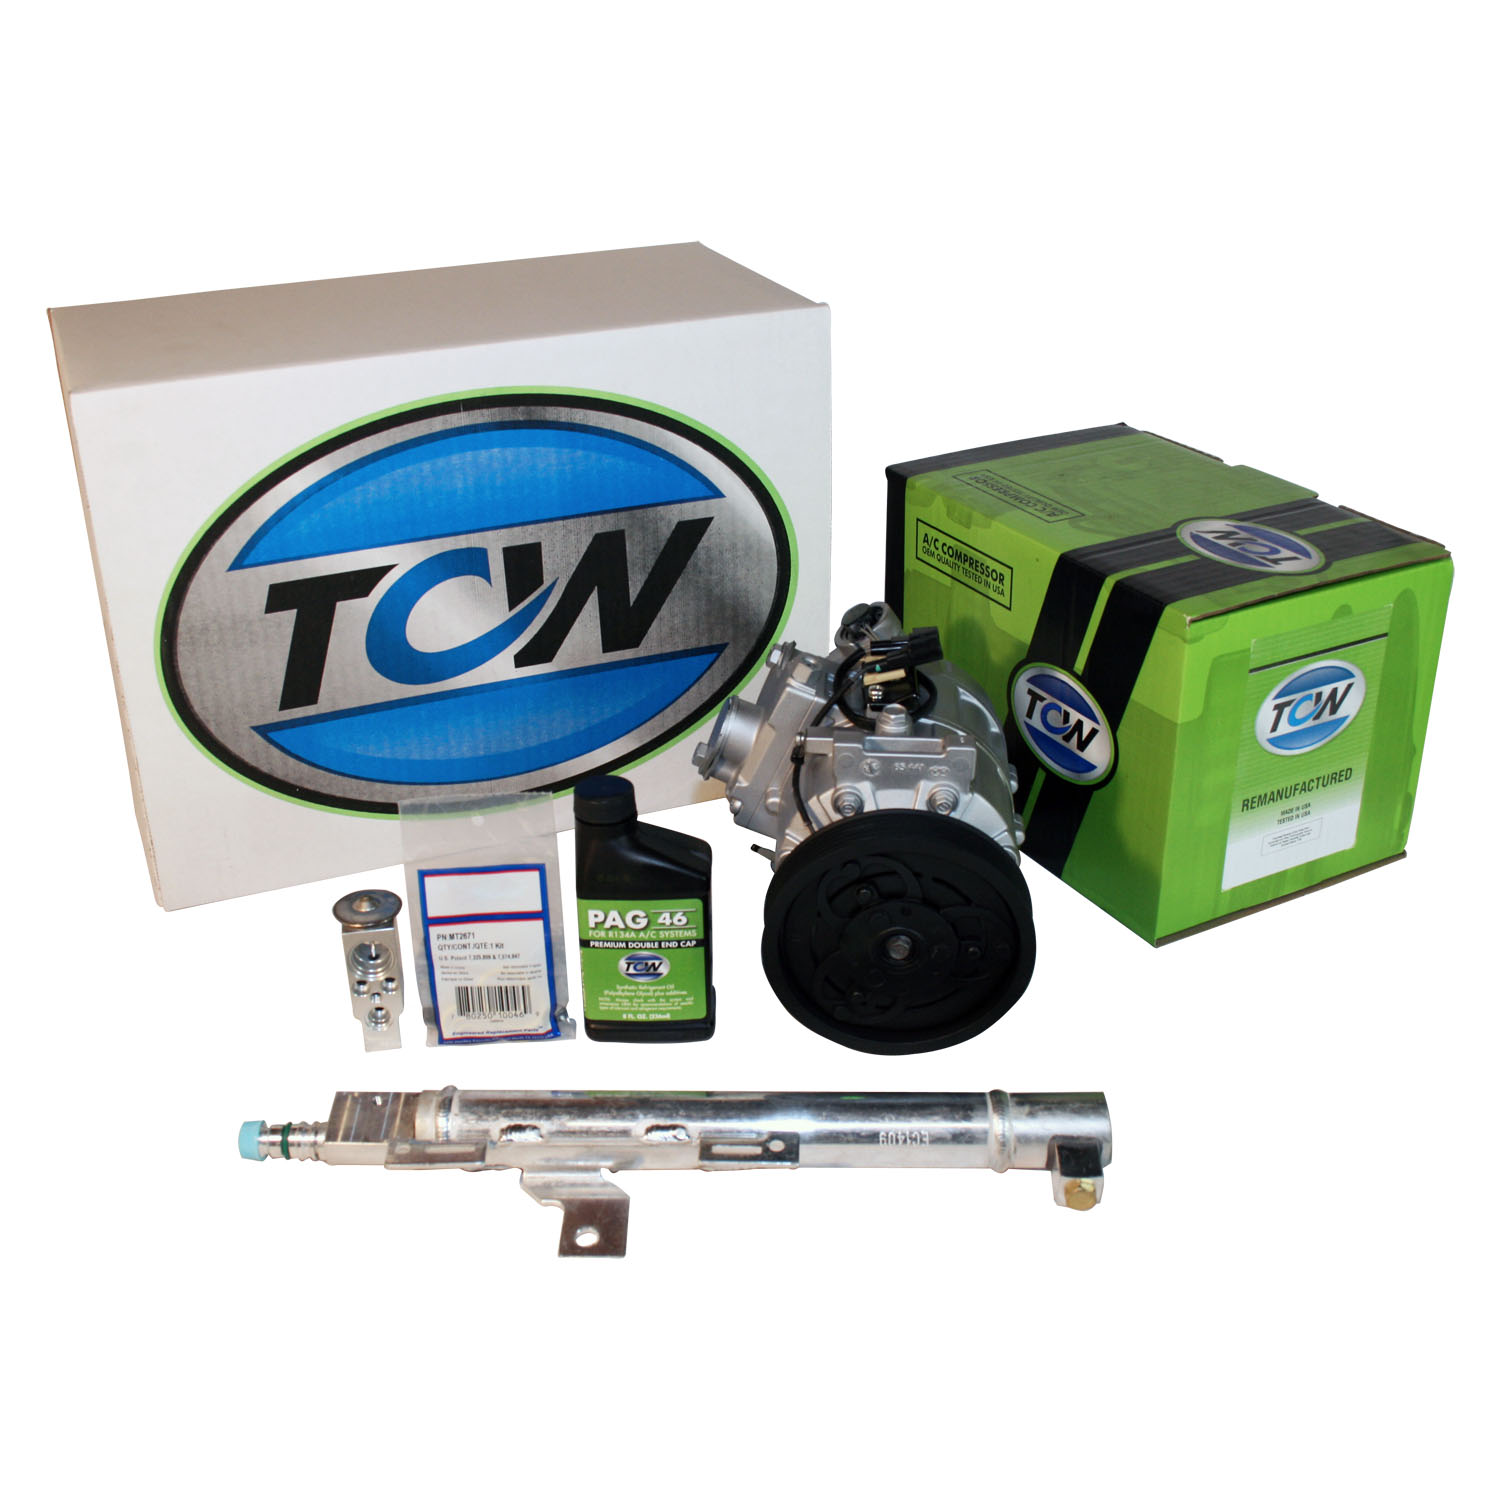 TCW Vehicle A/C Kit K1000479R Remanufactured